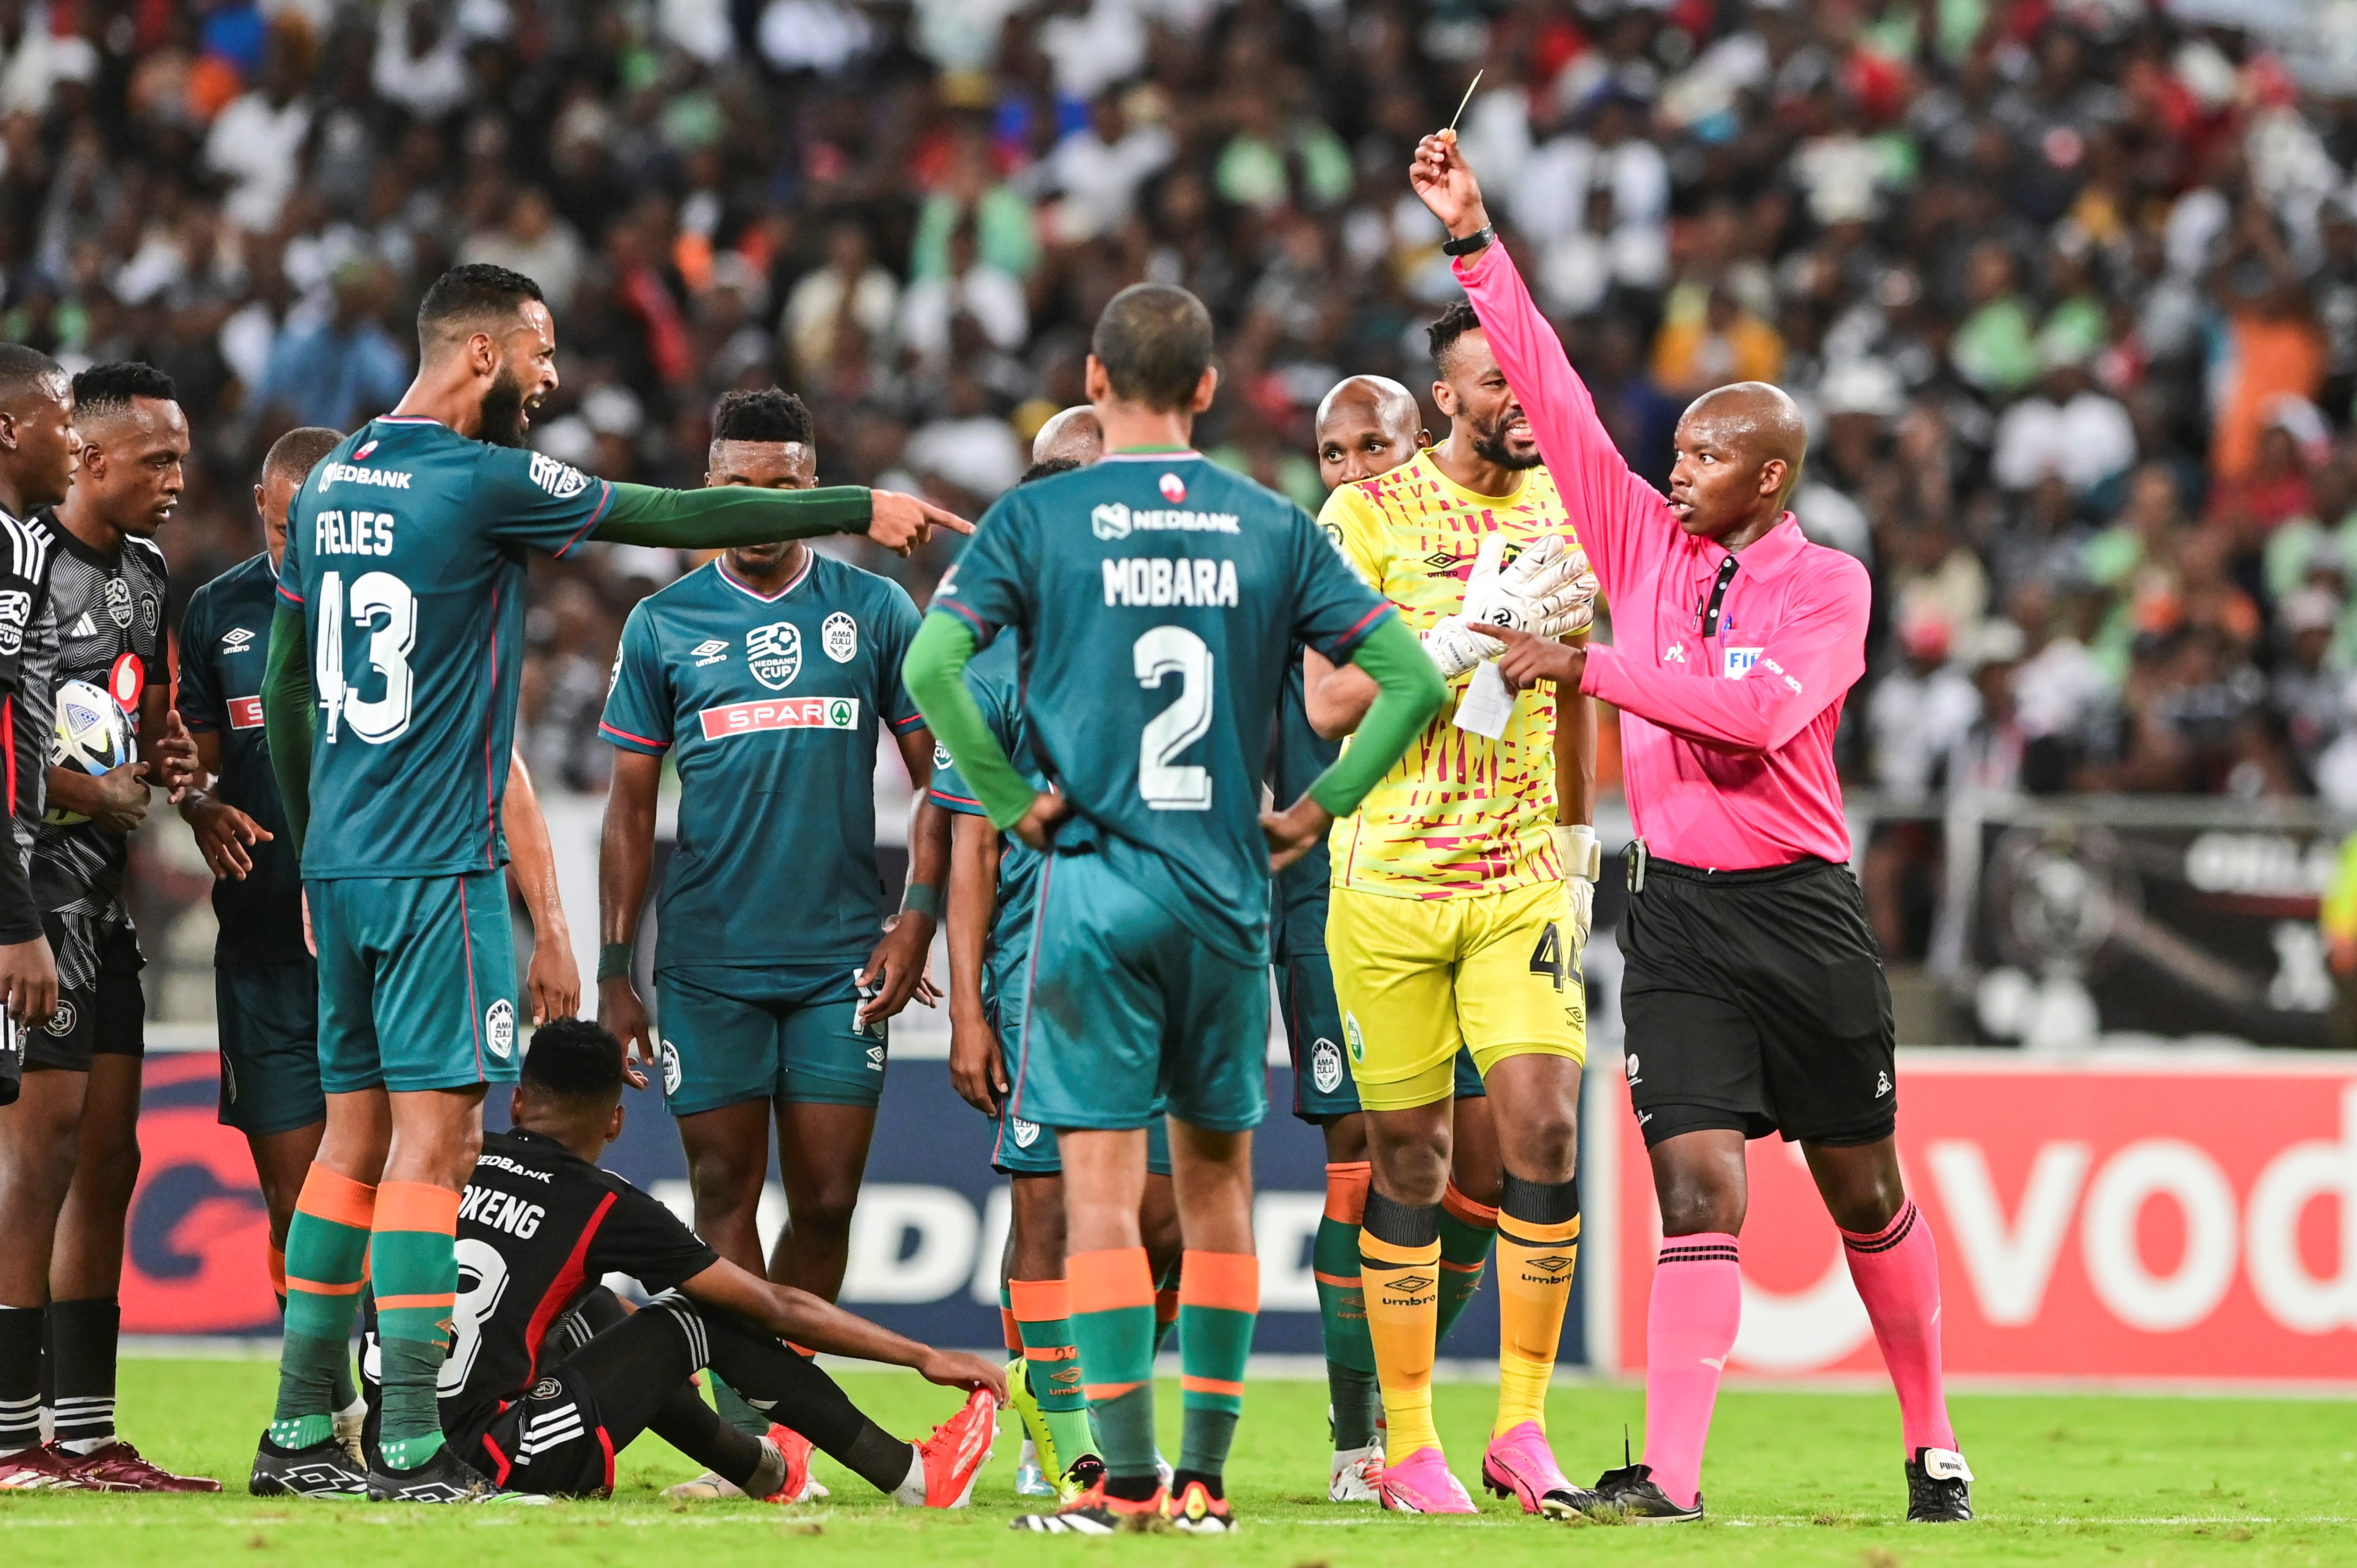 SAFA refereeing department to visit PSL clubs